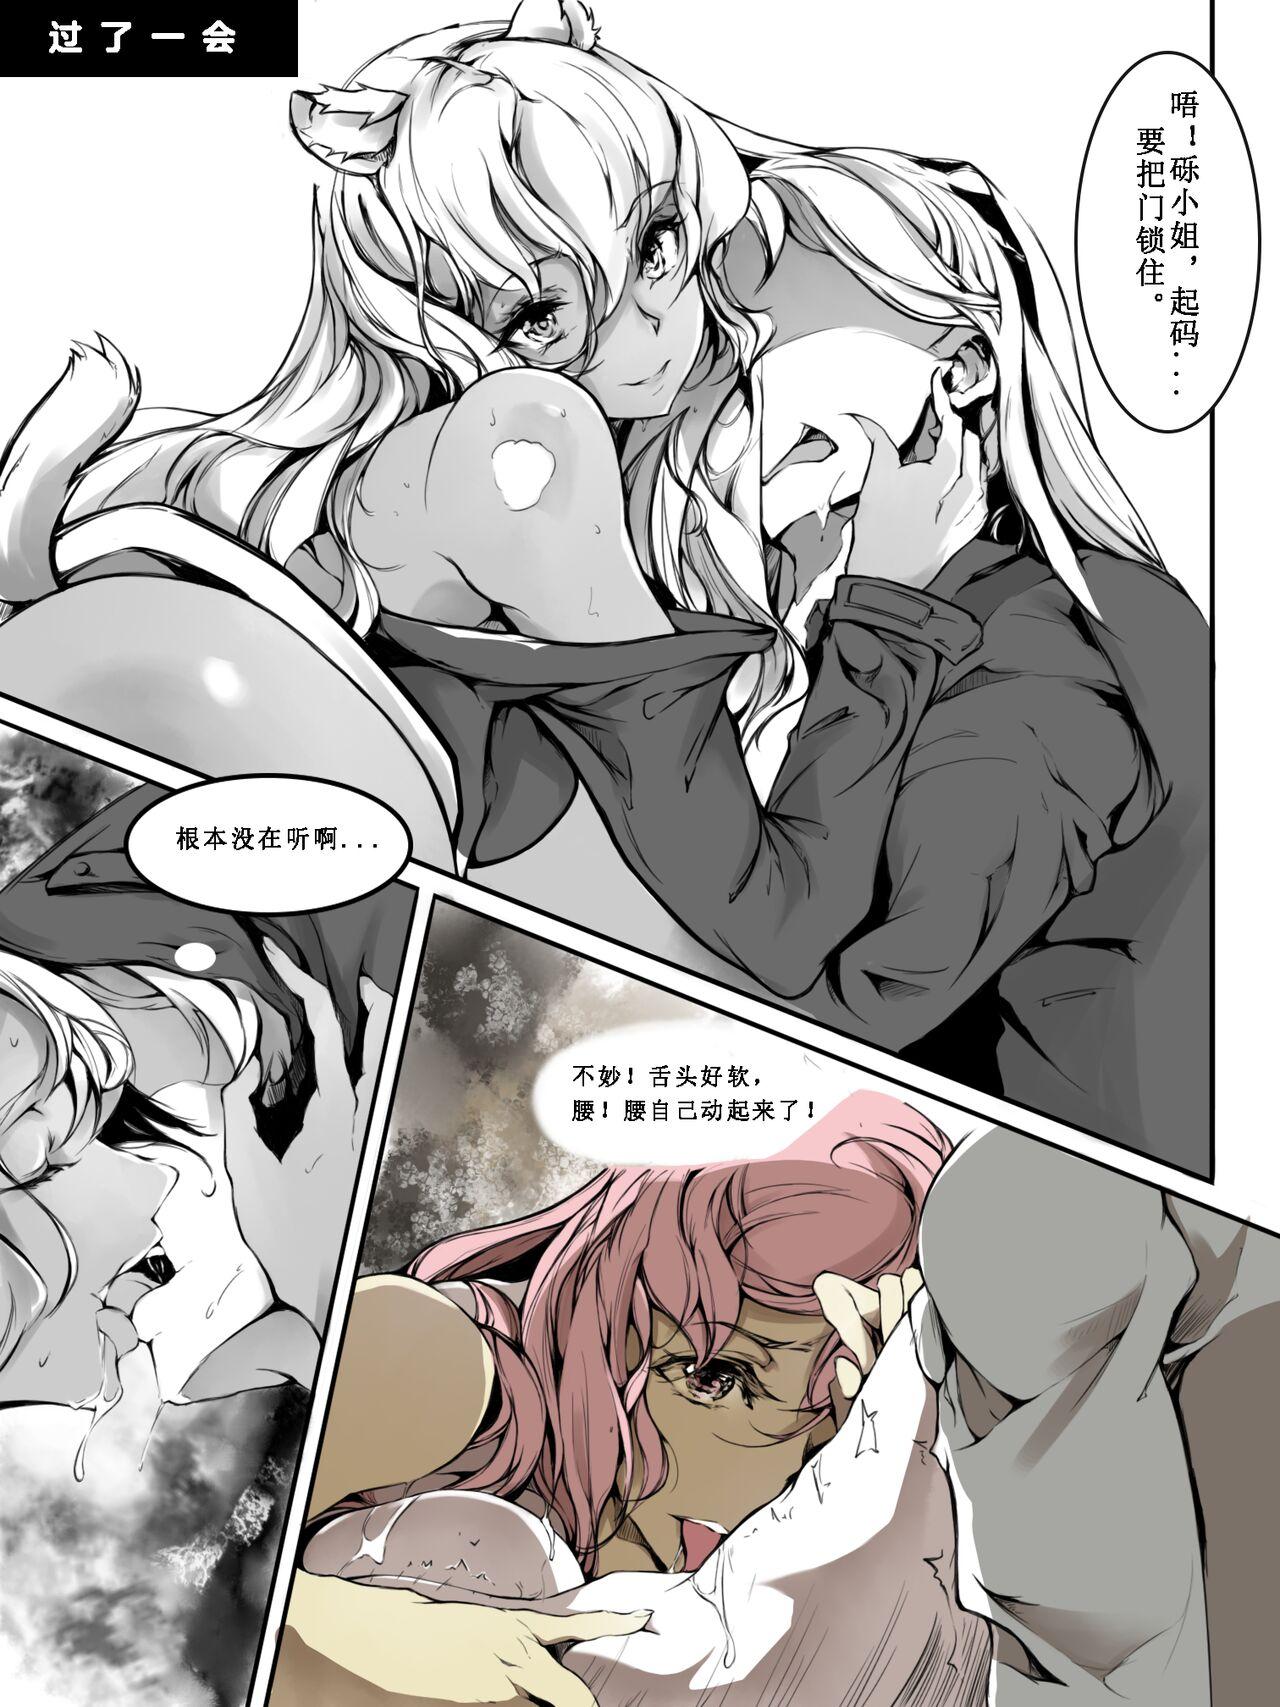 Granny Gravel R18 Doujinshi - Arknights Hot Wife - Page 6